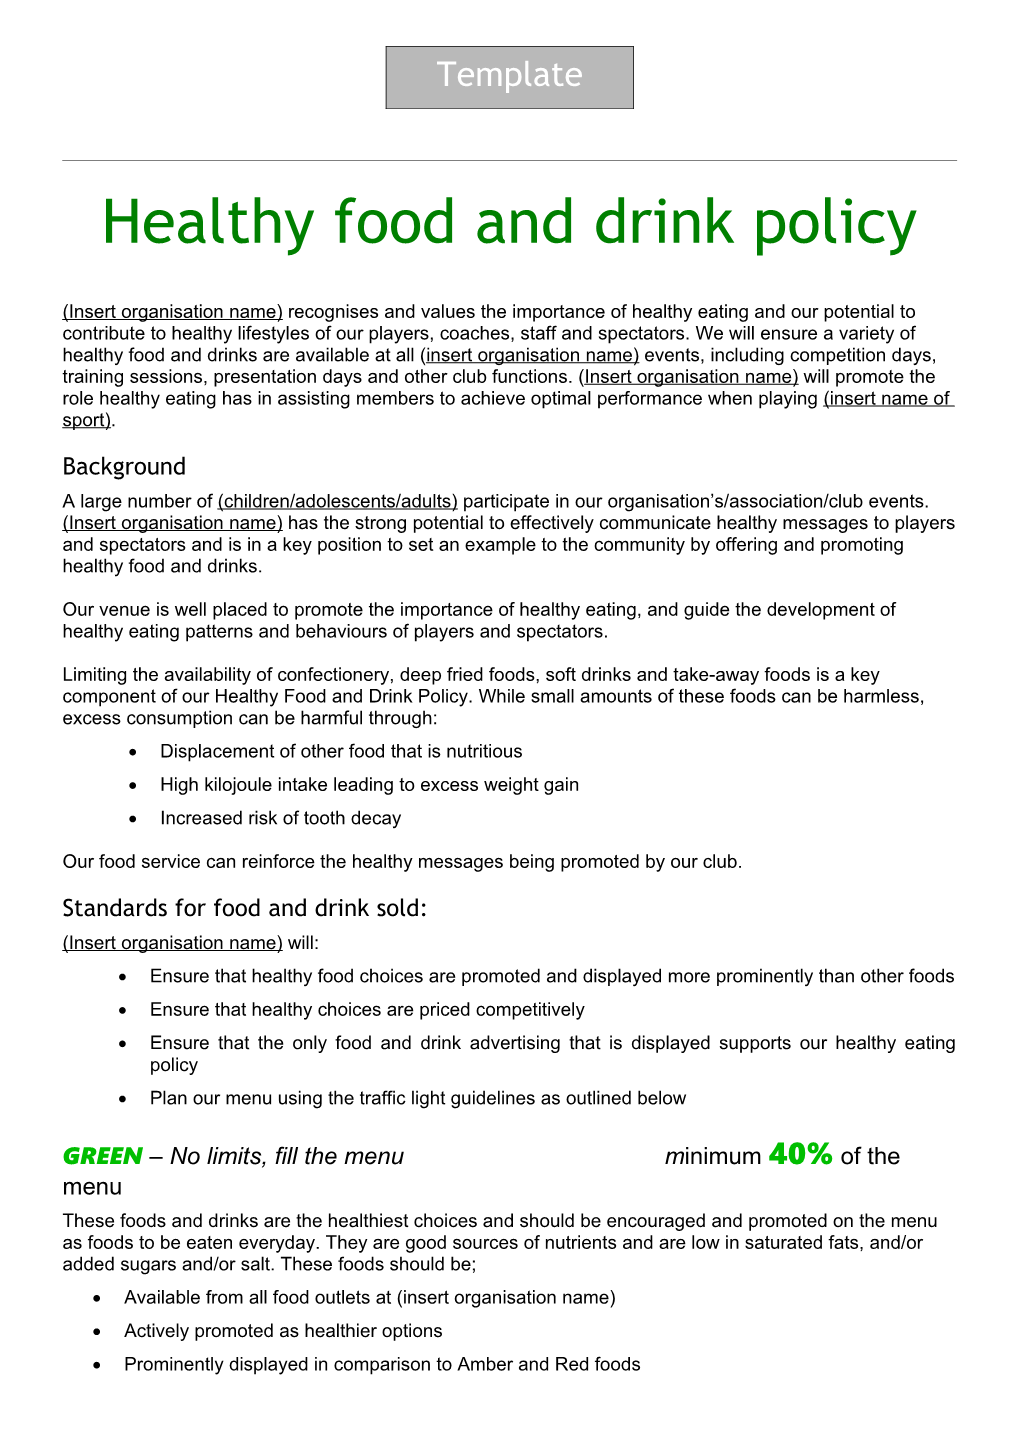 Healthy Food and Drink Policy